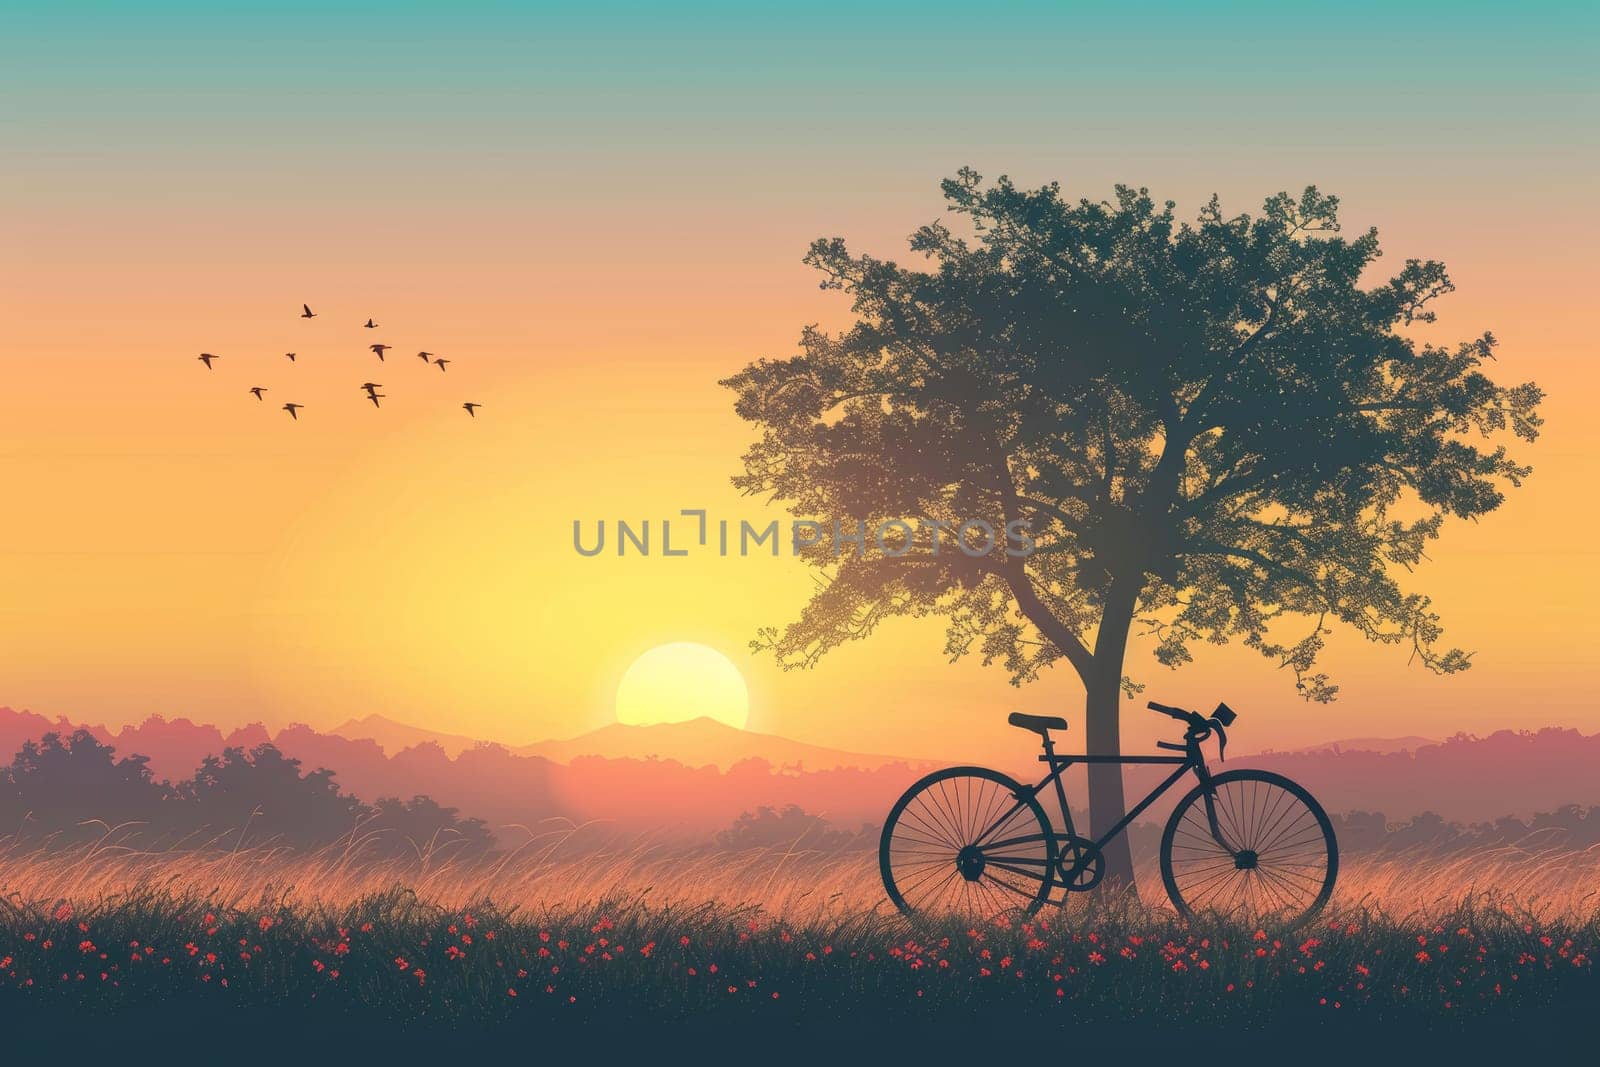 A tranquil scene unfolds with a bicycle resting against a silhouetted tree at sunset. The sky is a vibrant tapestry of warm colors as dusk approaches.